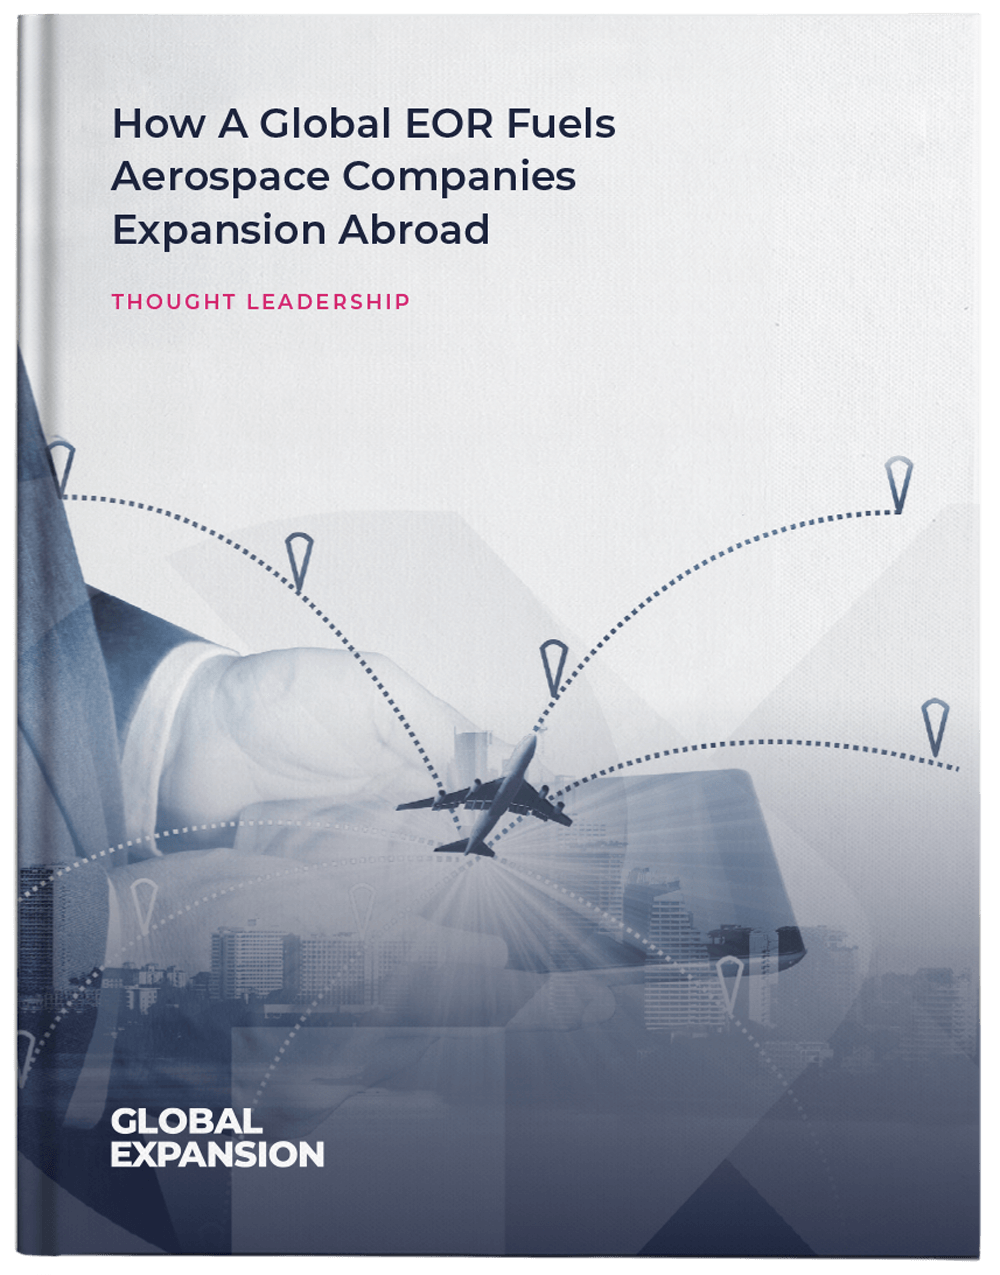 How-A-Global-EOR-Fuels-Aerospace-Companies-Expansion-Abroad-Cover